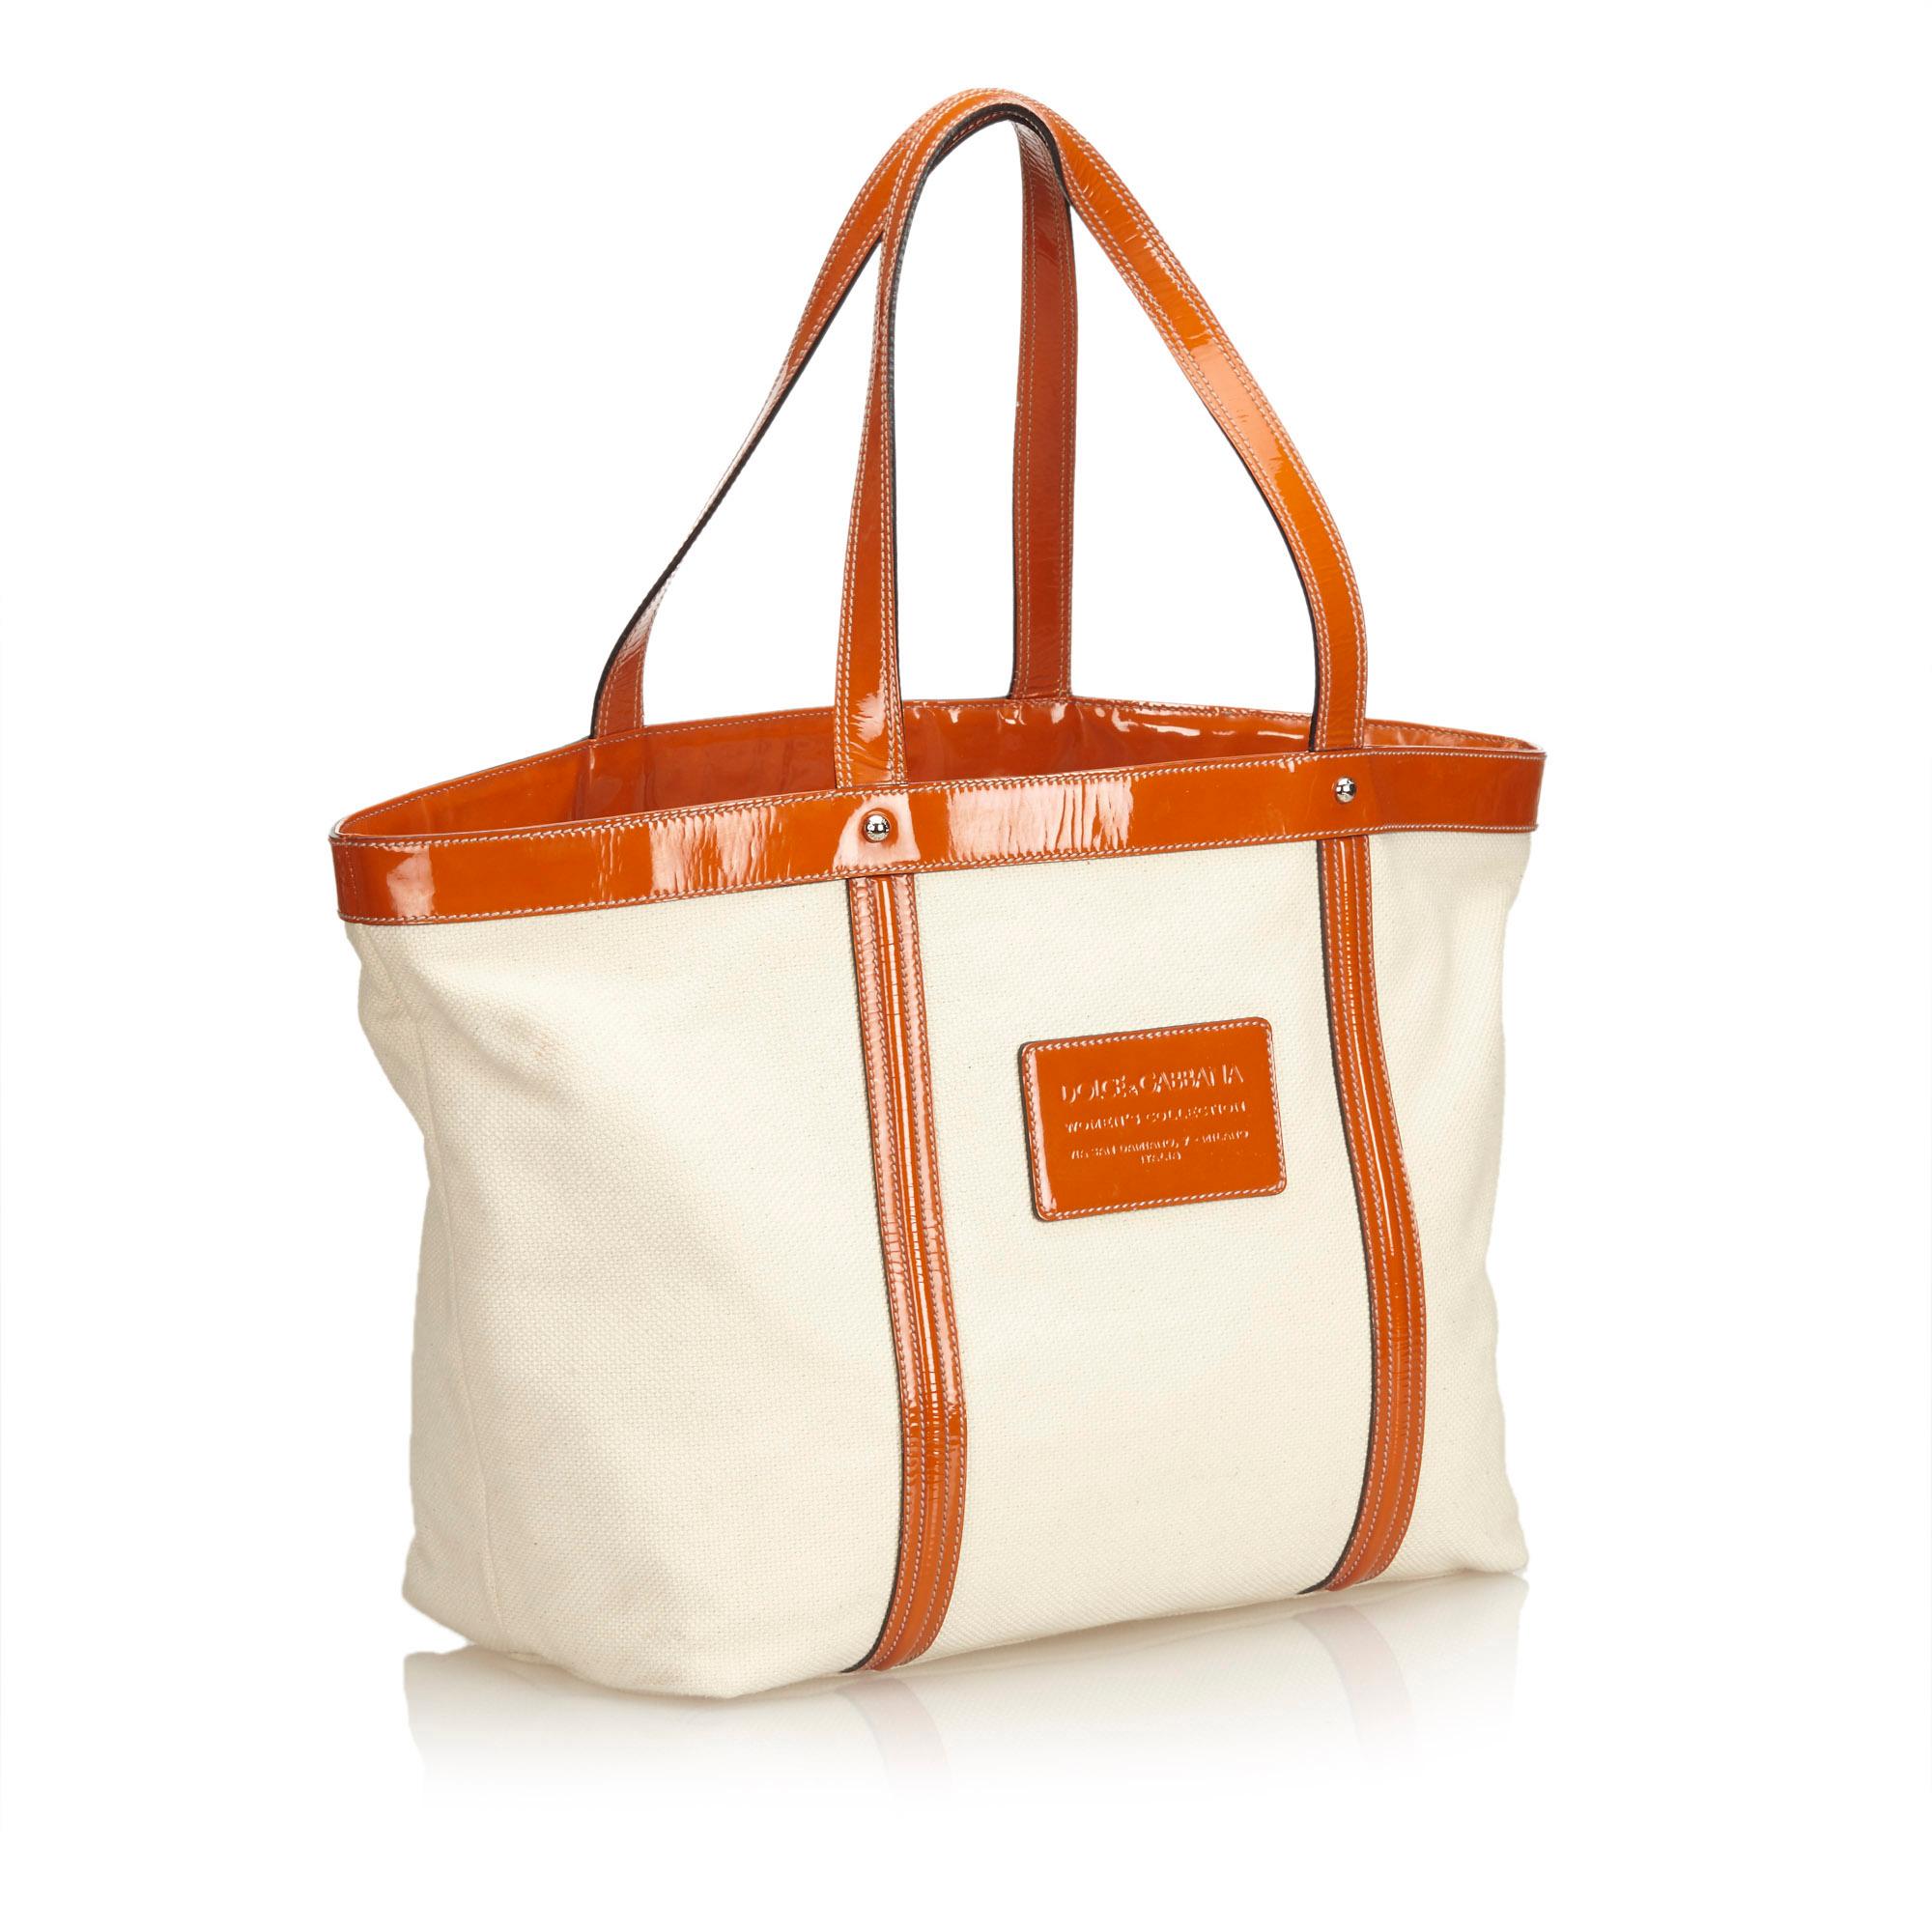 This tote bag features a canvas body with patent leather trim, flat leather straps, open top, and interior zip and slip pockets. It carries as AB condition rating.

Inclusions: 
Authenticity Card
Dimensions:
Length: 34.00 cm
Width: 38.00 cm
Depth: